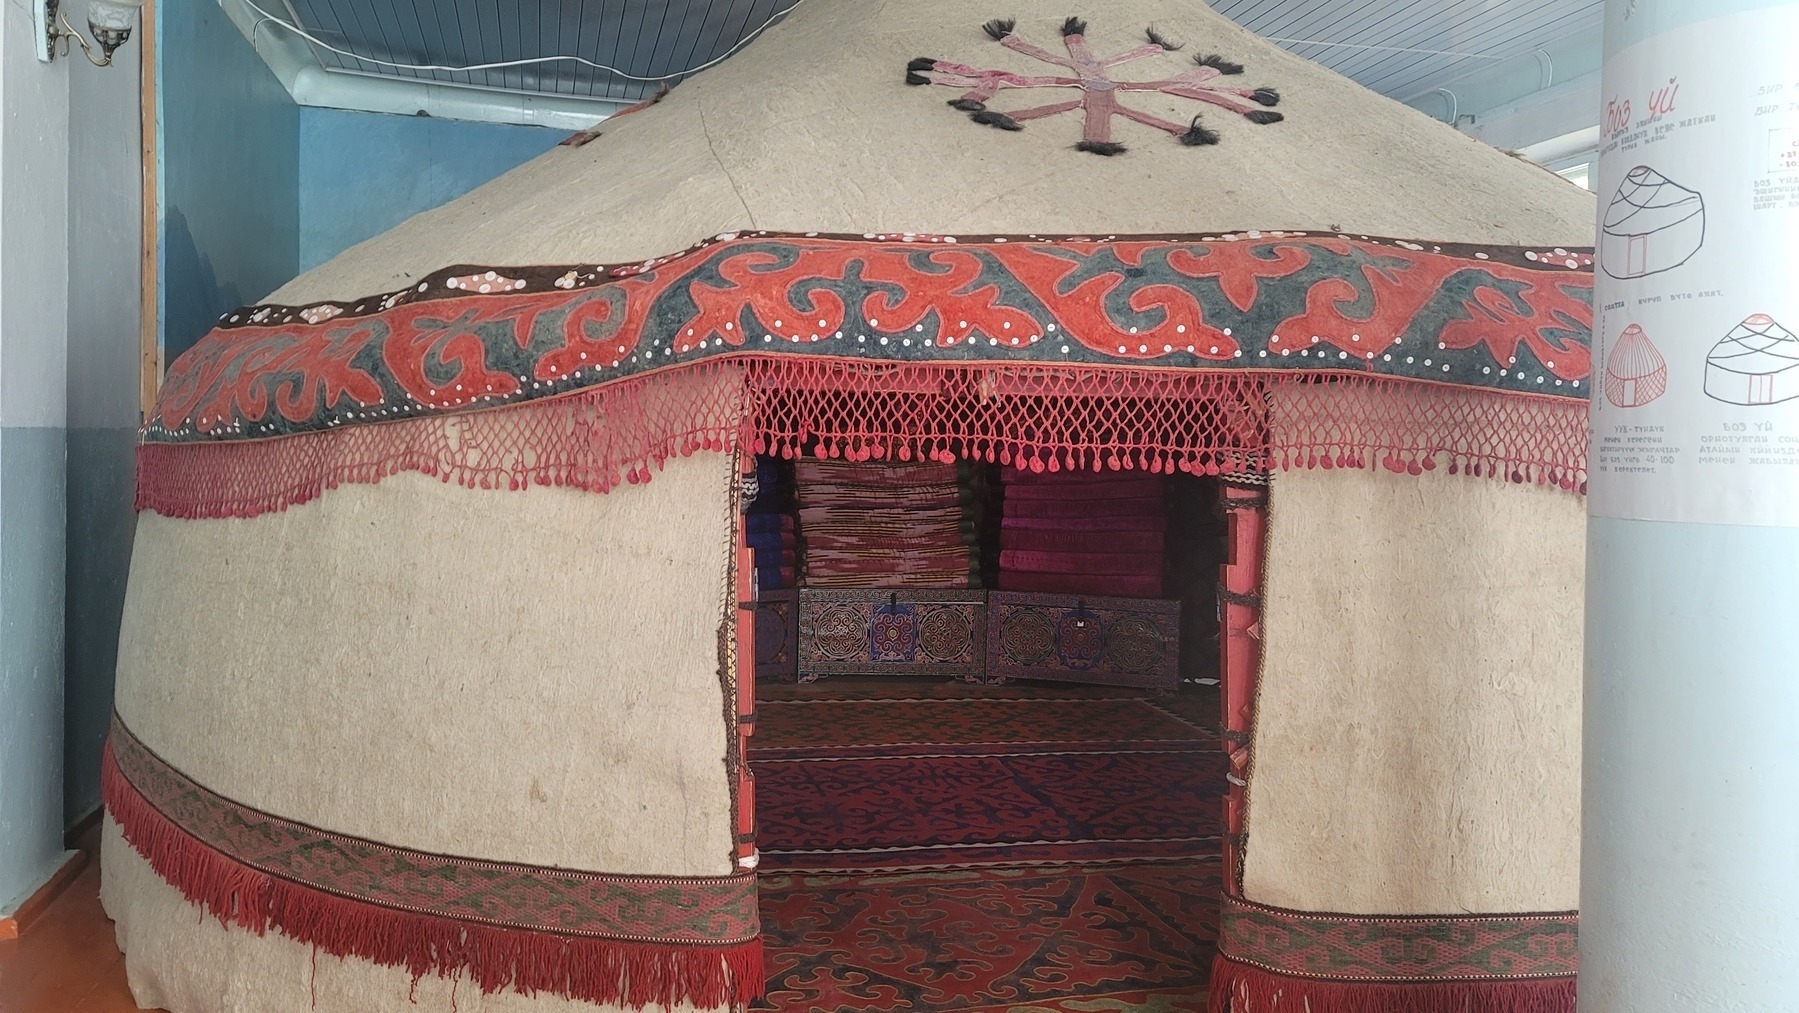 Kyrgyz felt yurt set up inside a room with chests, rugs and blankets visible inside